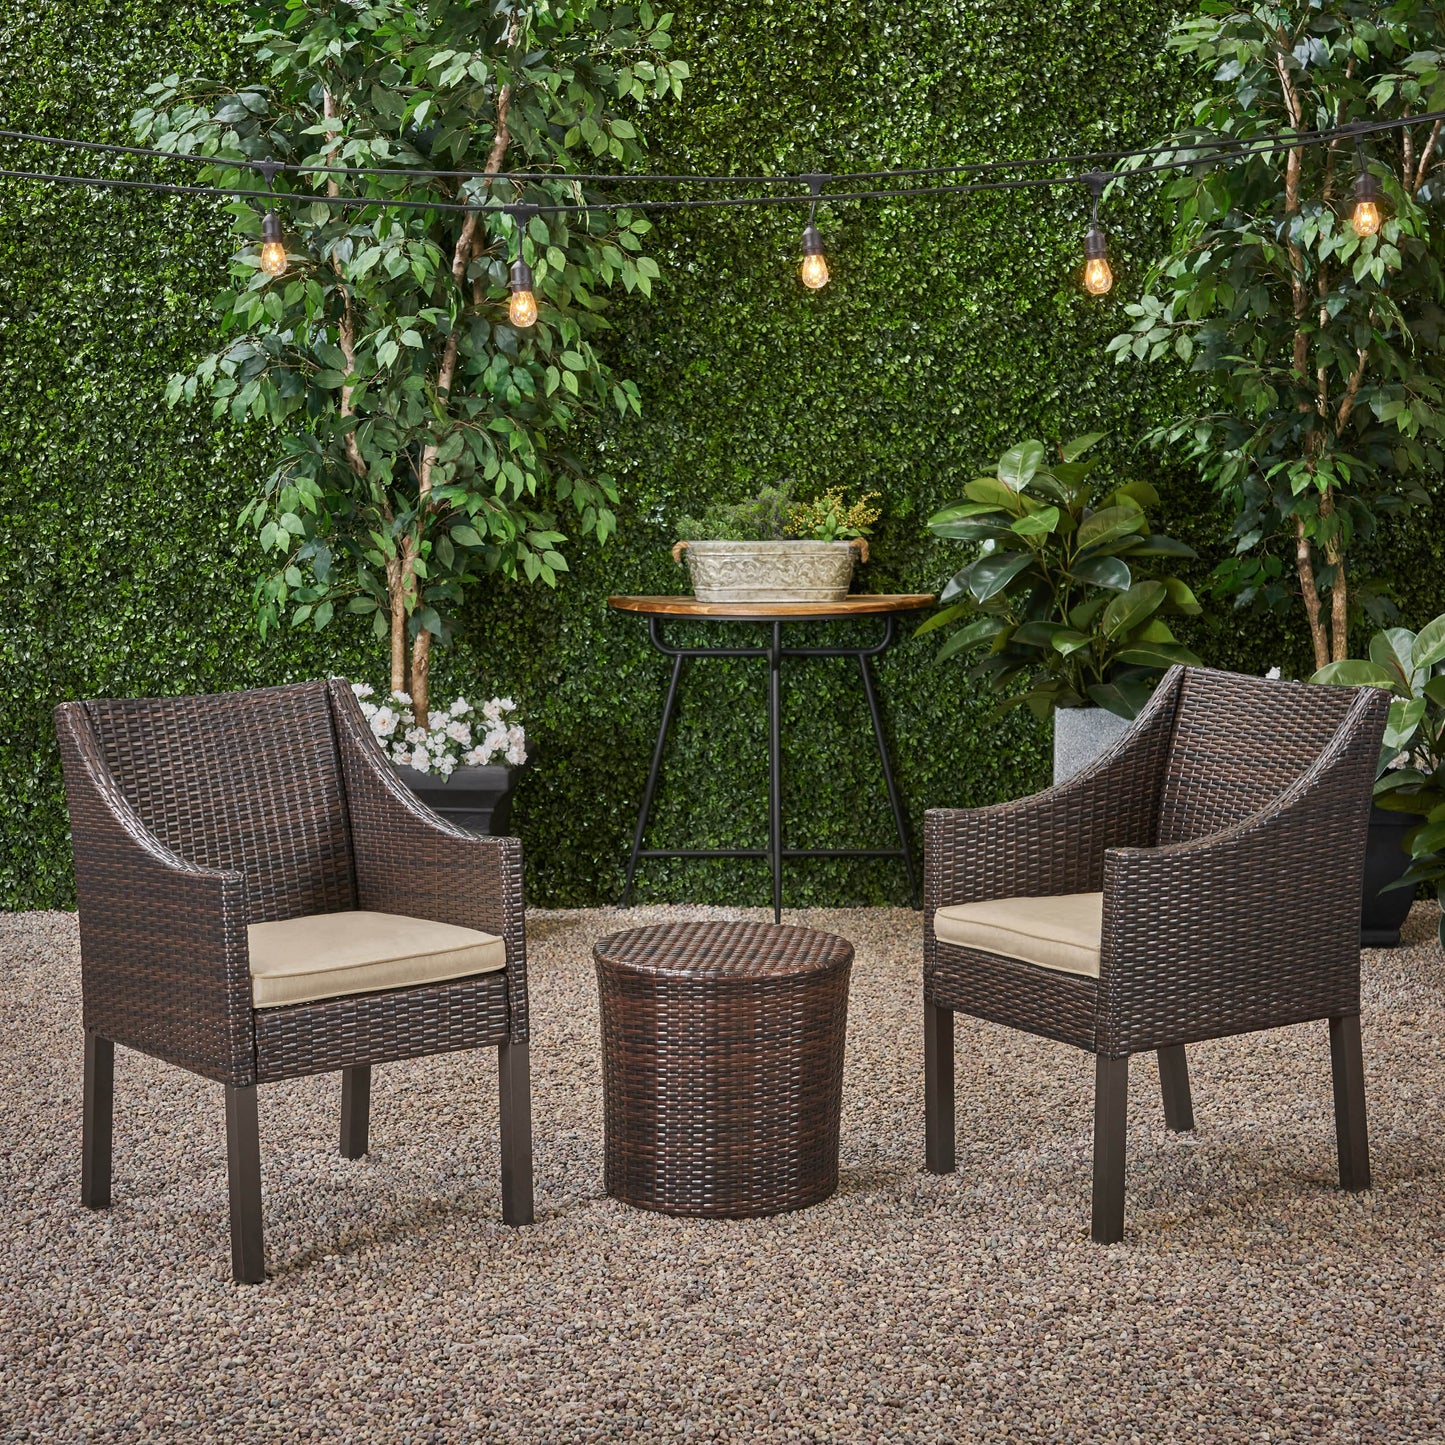 Sims Outdoor 3 Piece Wicker Chat Set